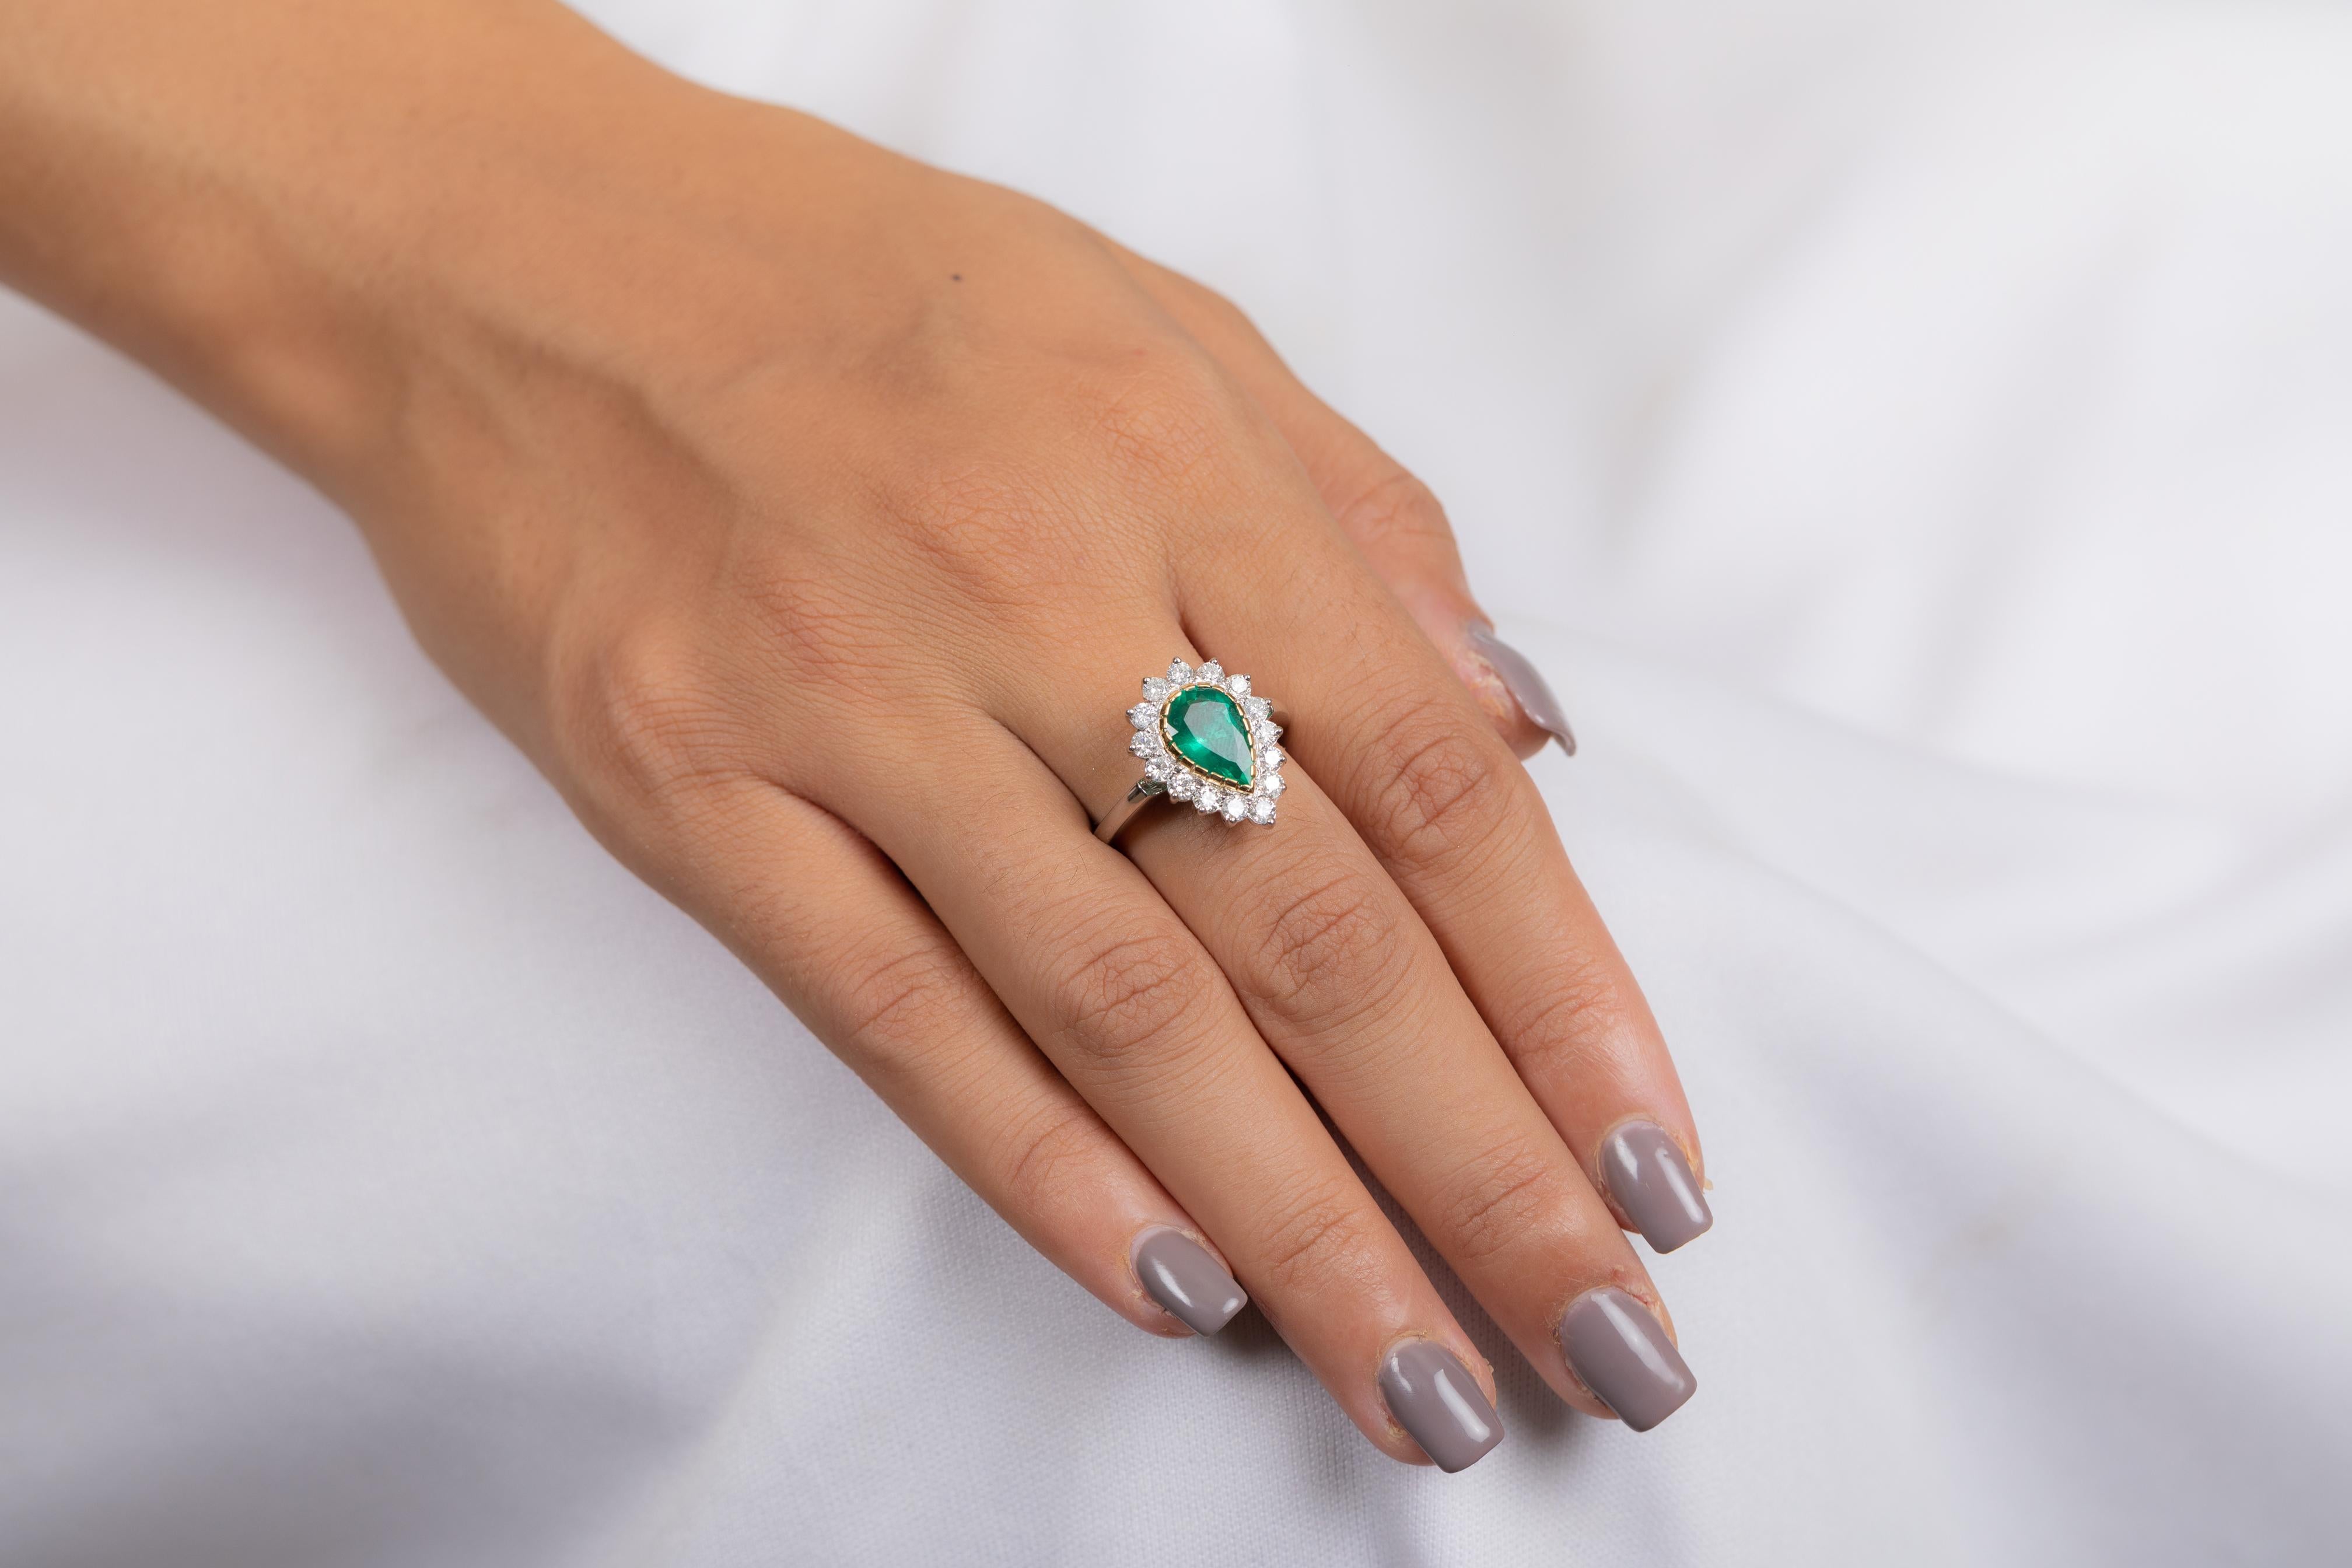 For Sale:  Statement 18k Solid White Gold Pear Emerald Halo Wedding Ring with Diamonds 3